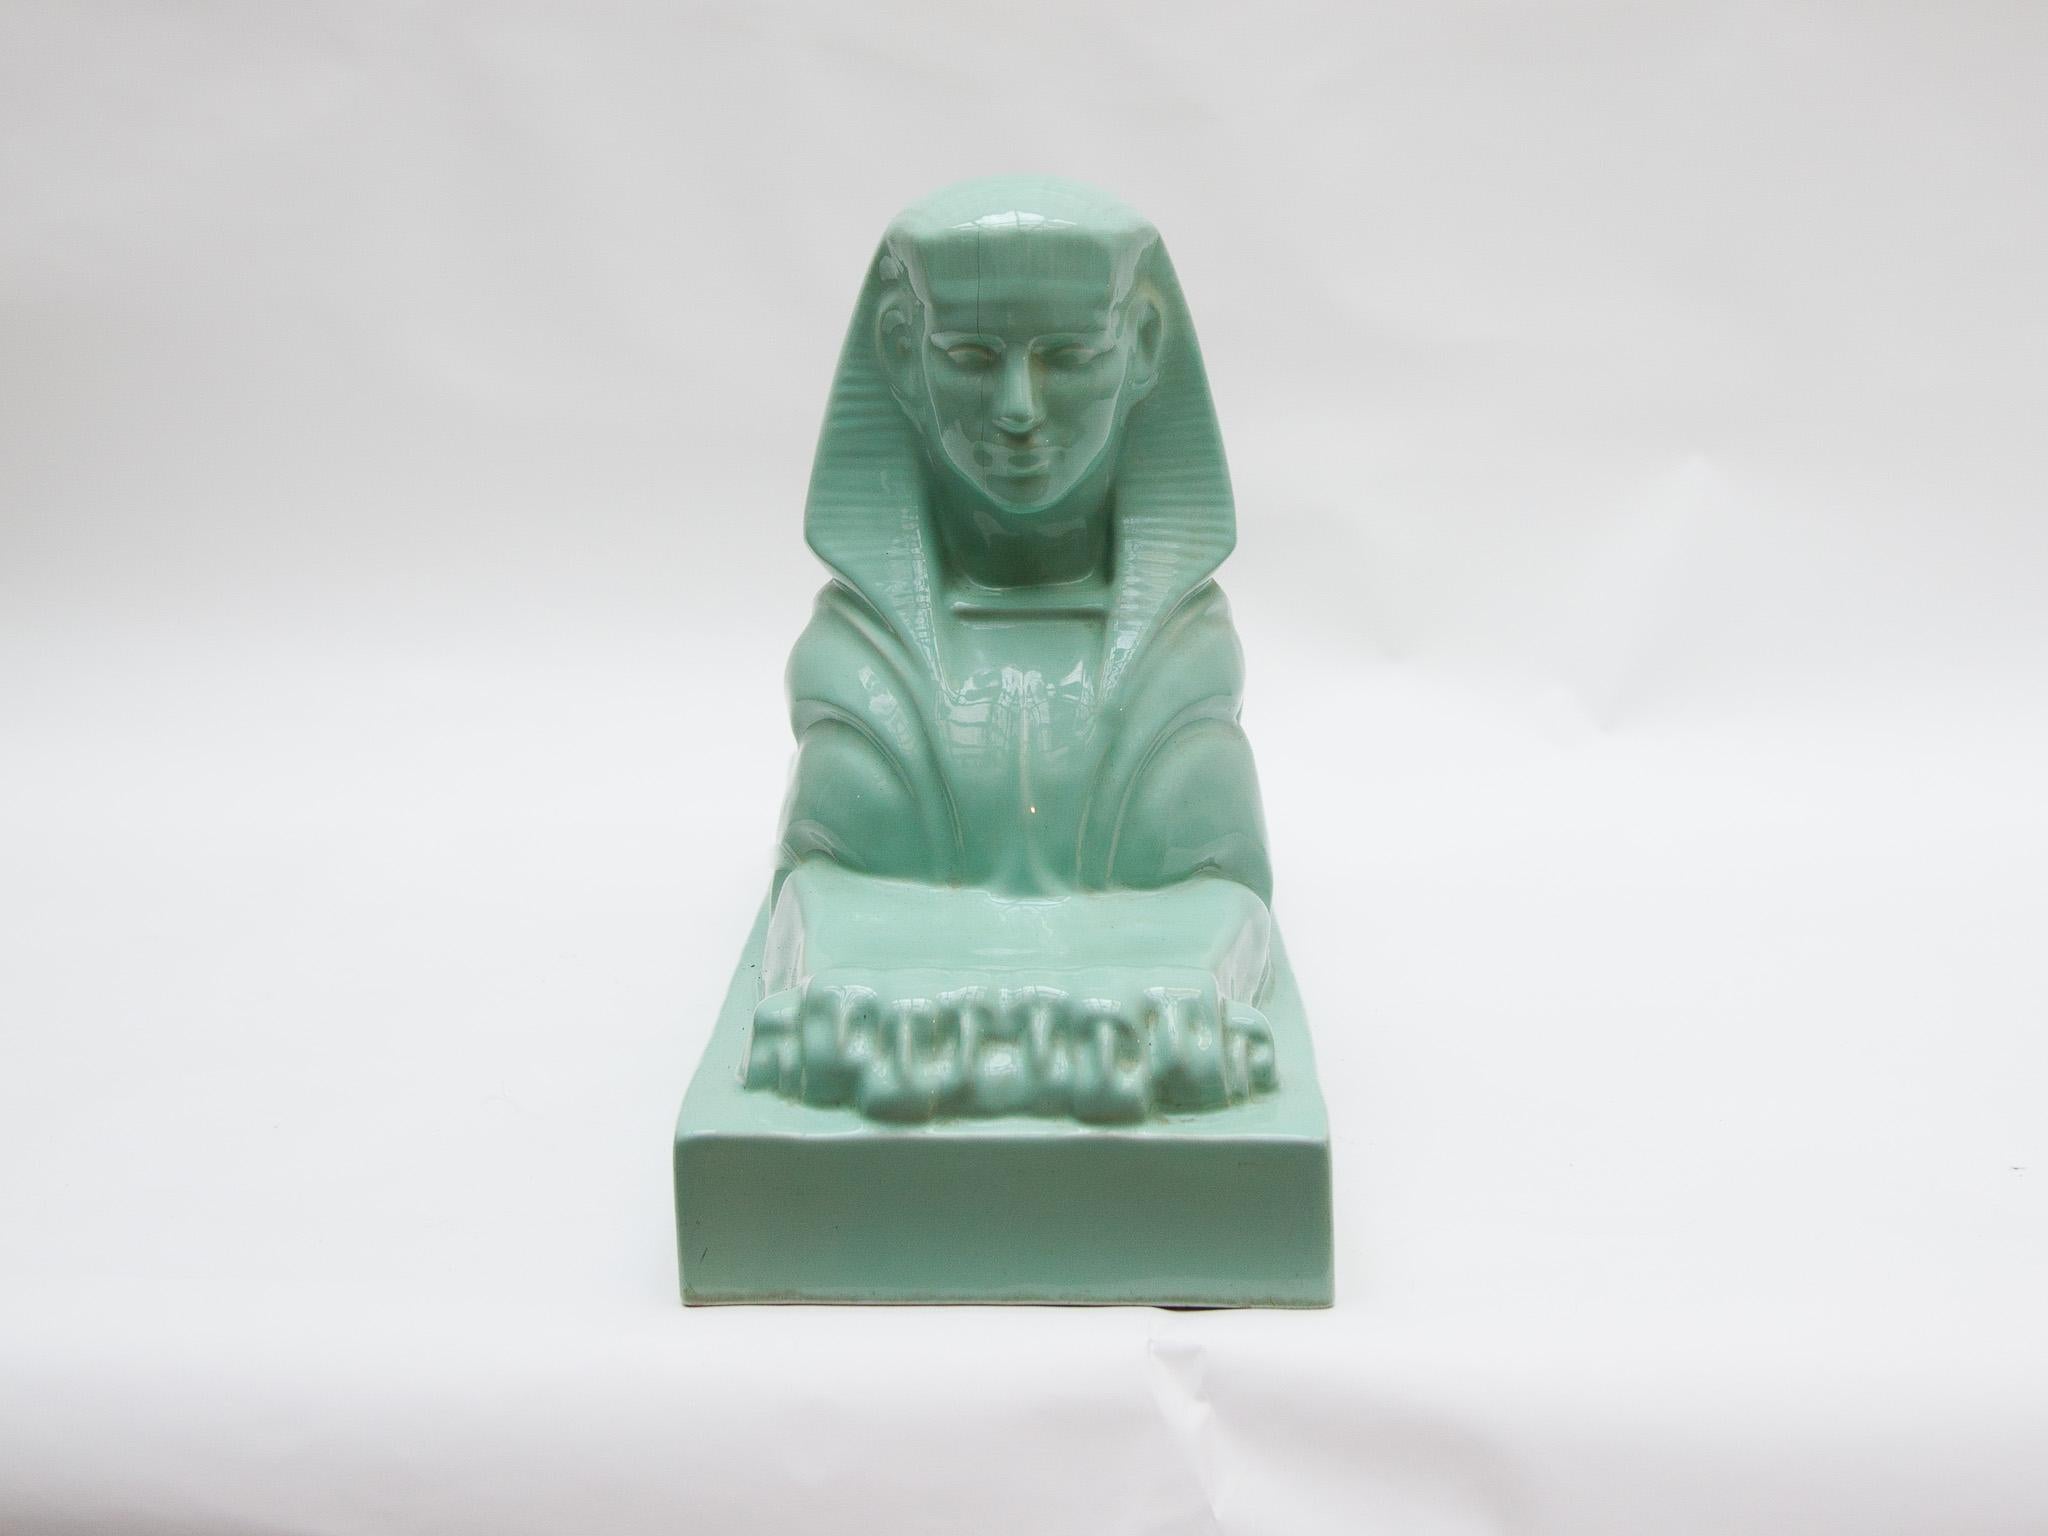 Glazed Ceramic Sphinx Designed by Vos for Royal Sphinx Maastricht/ Petrus Regout